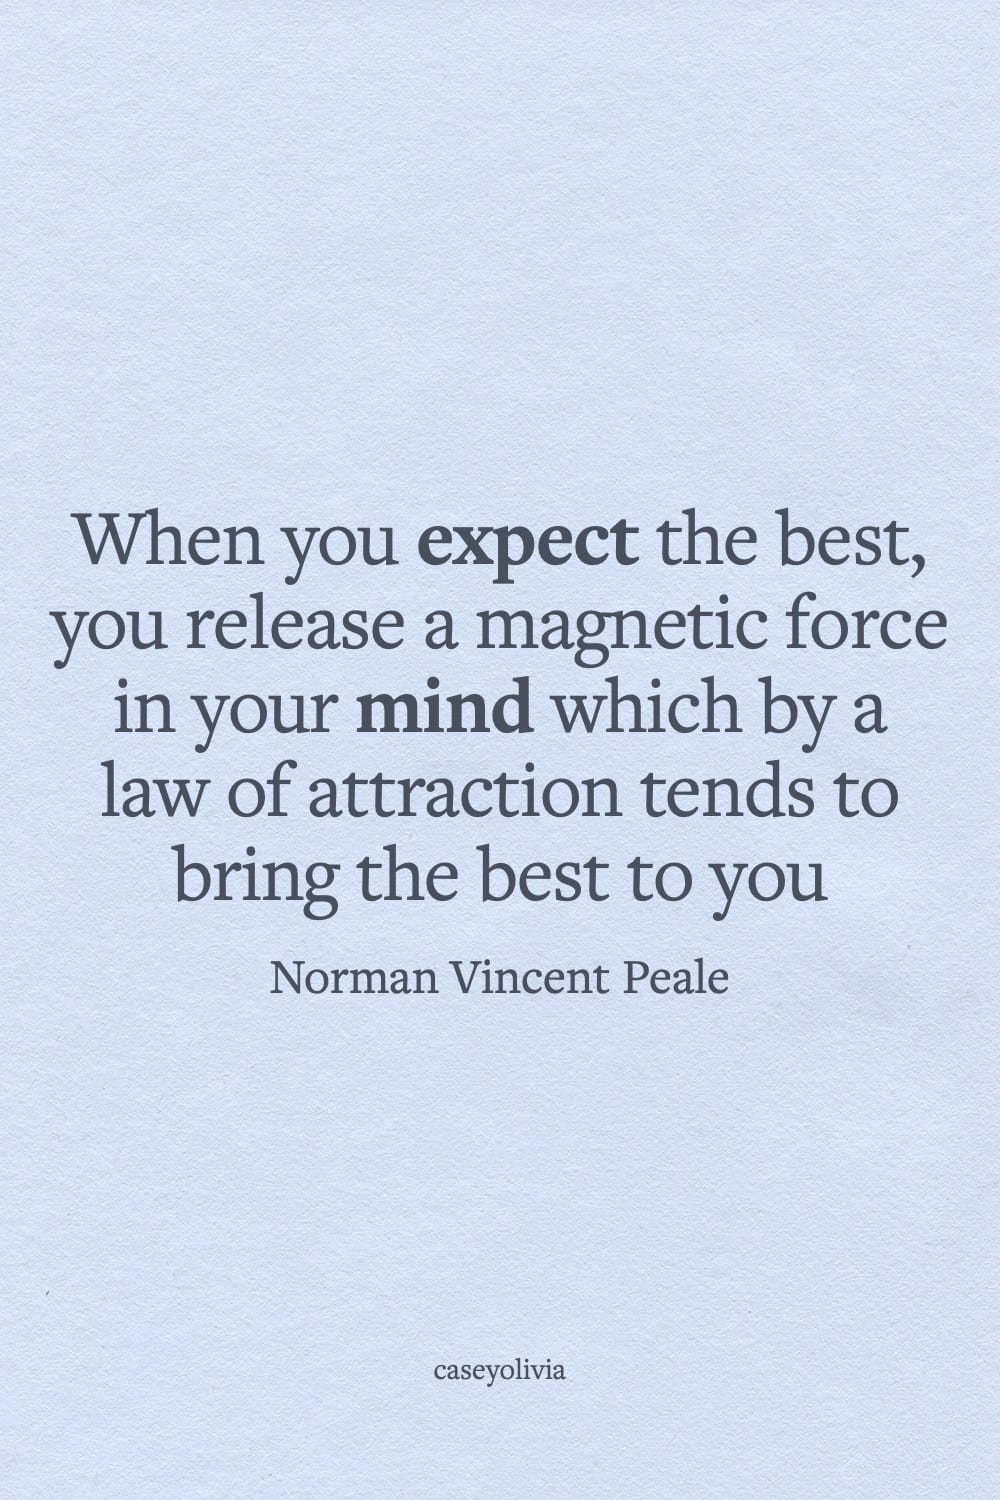 norman vincent peale law of attraction quotation